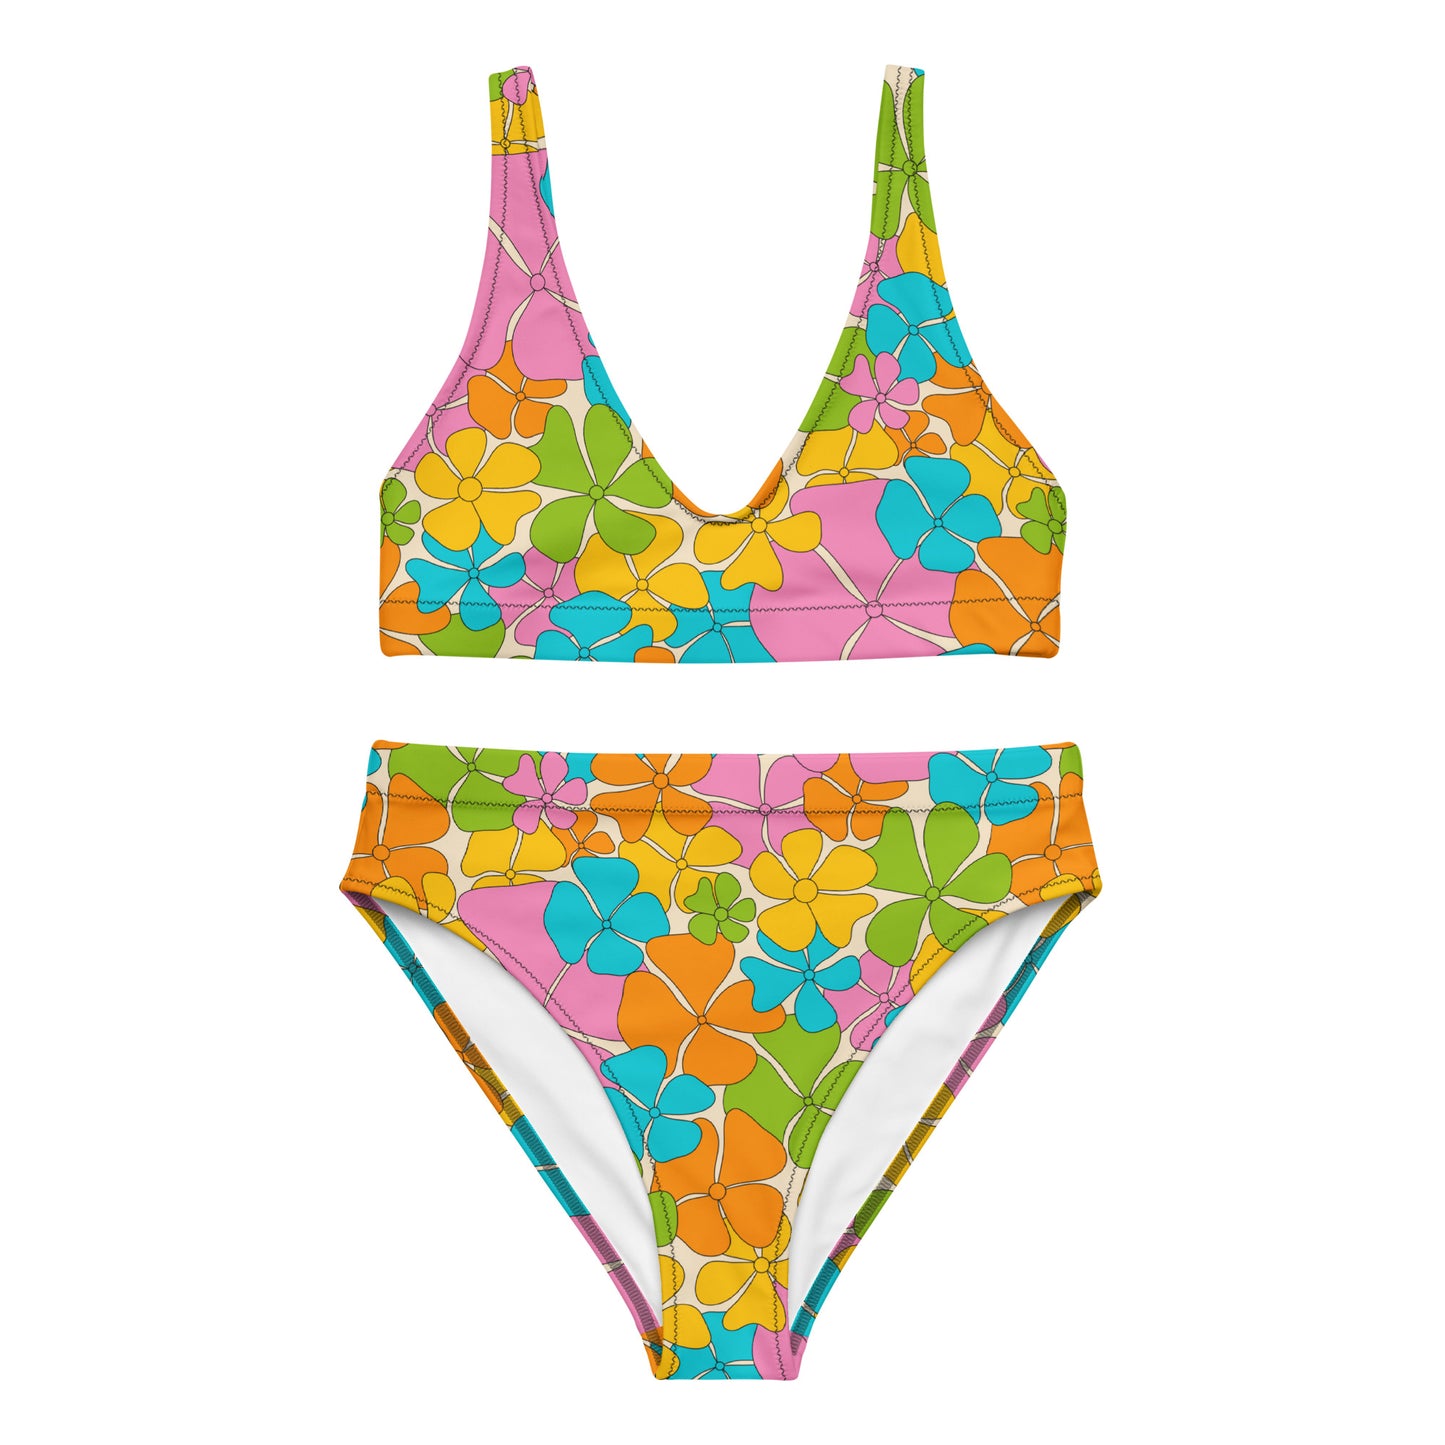 ADELIE pastel - Bikinis made of recycled material